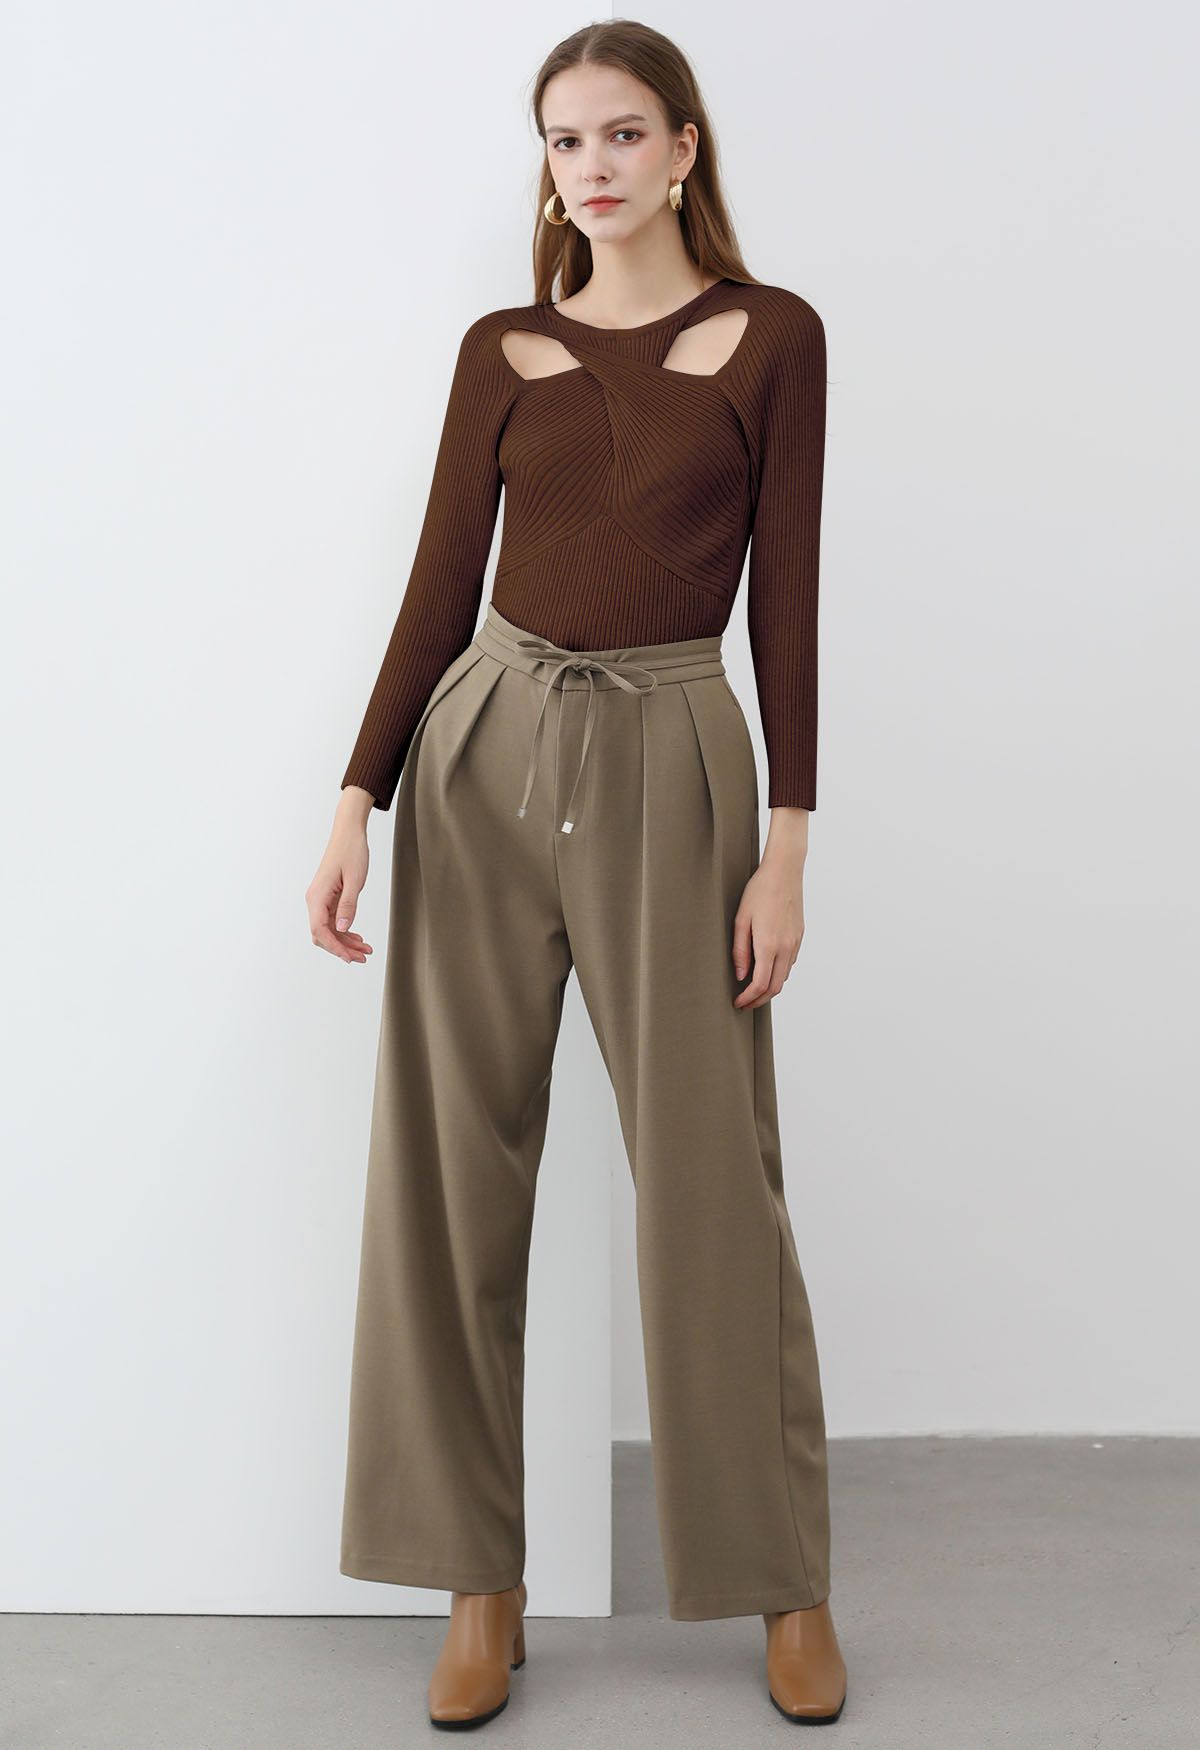 Twist Cutout Neck Ribbed Knit Top in Brown